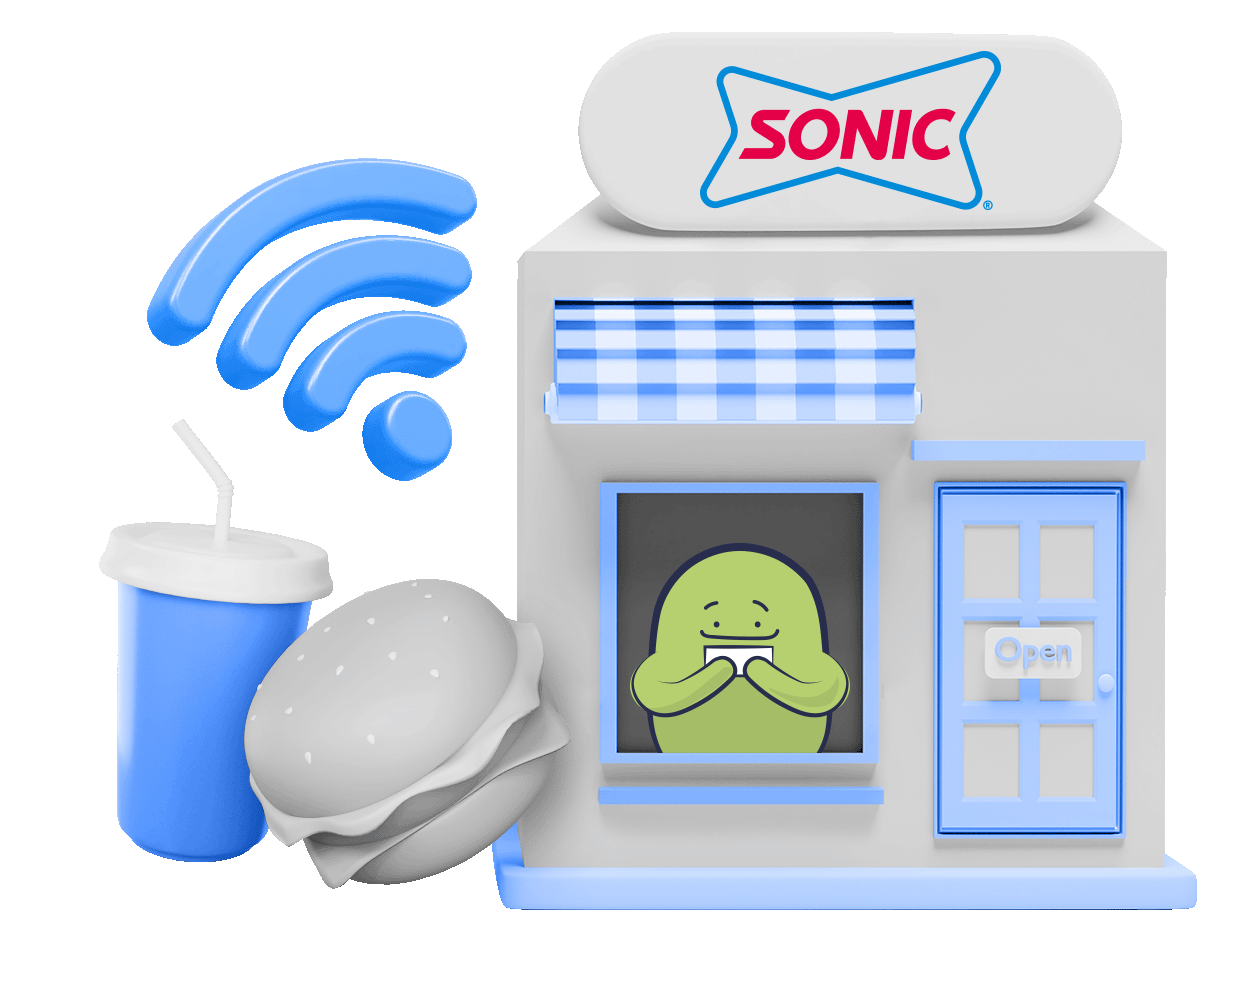 How to connect to Sonic Drive-In WiFi more safely